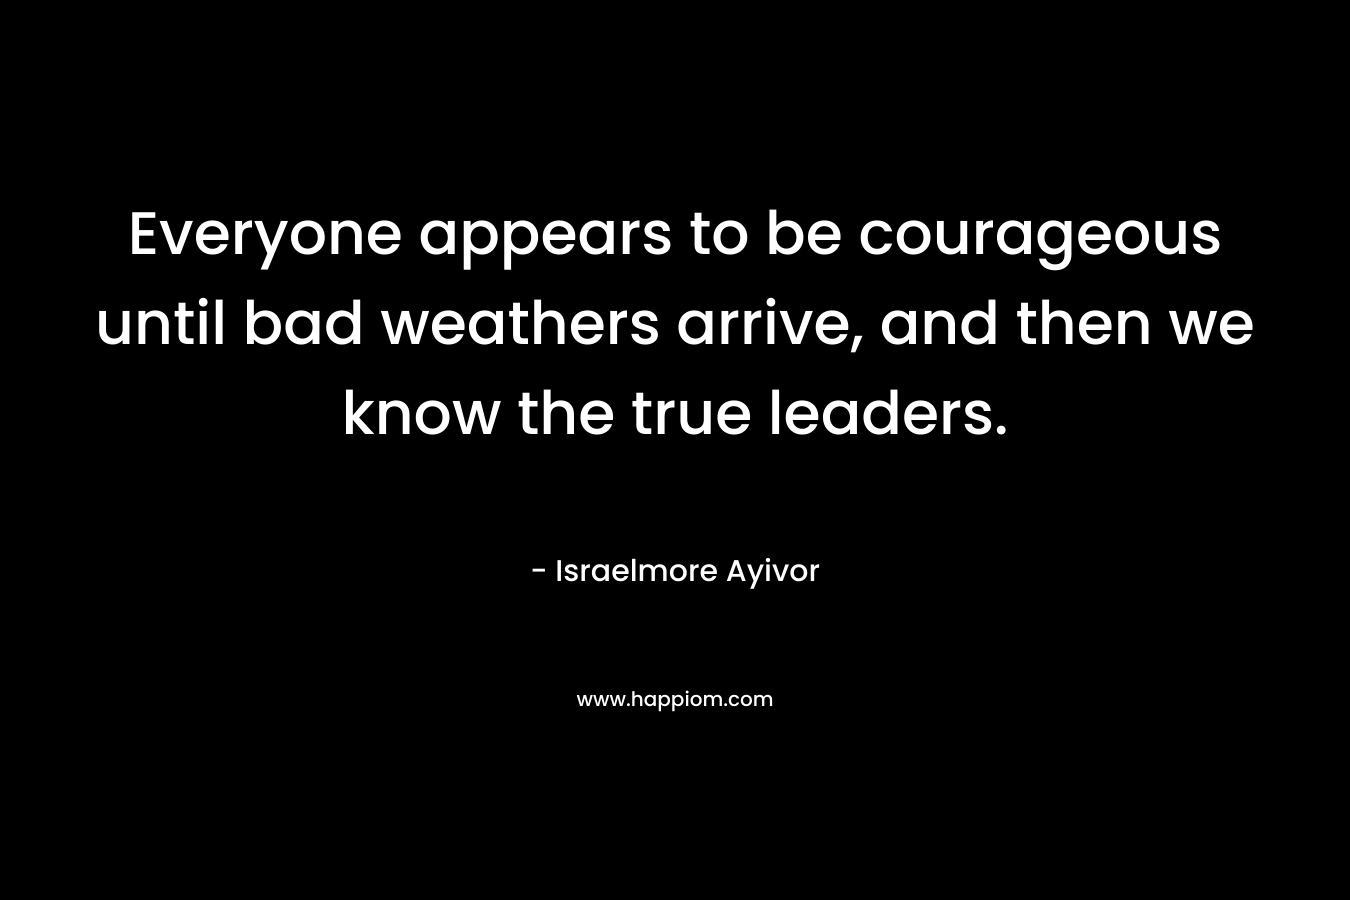 Everyone appears to be courageous until bad weathers arrive, and then we know the true leaders.